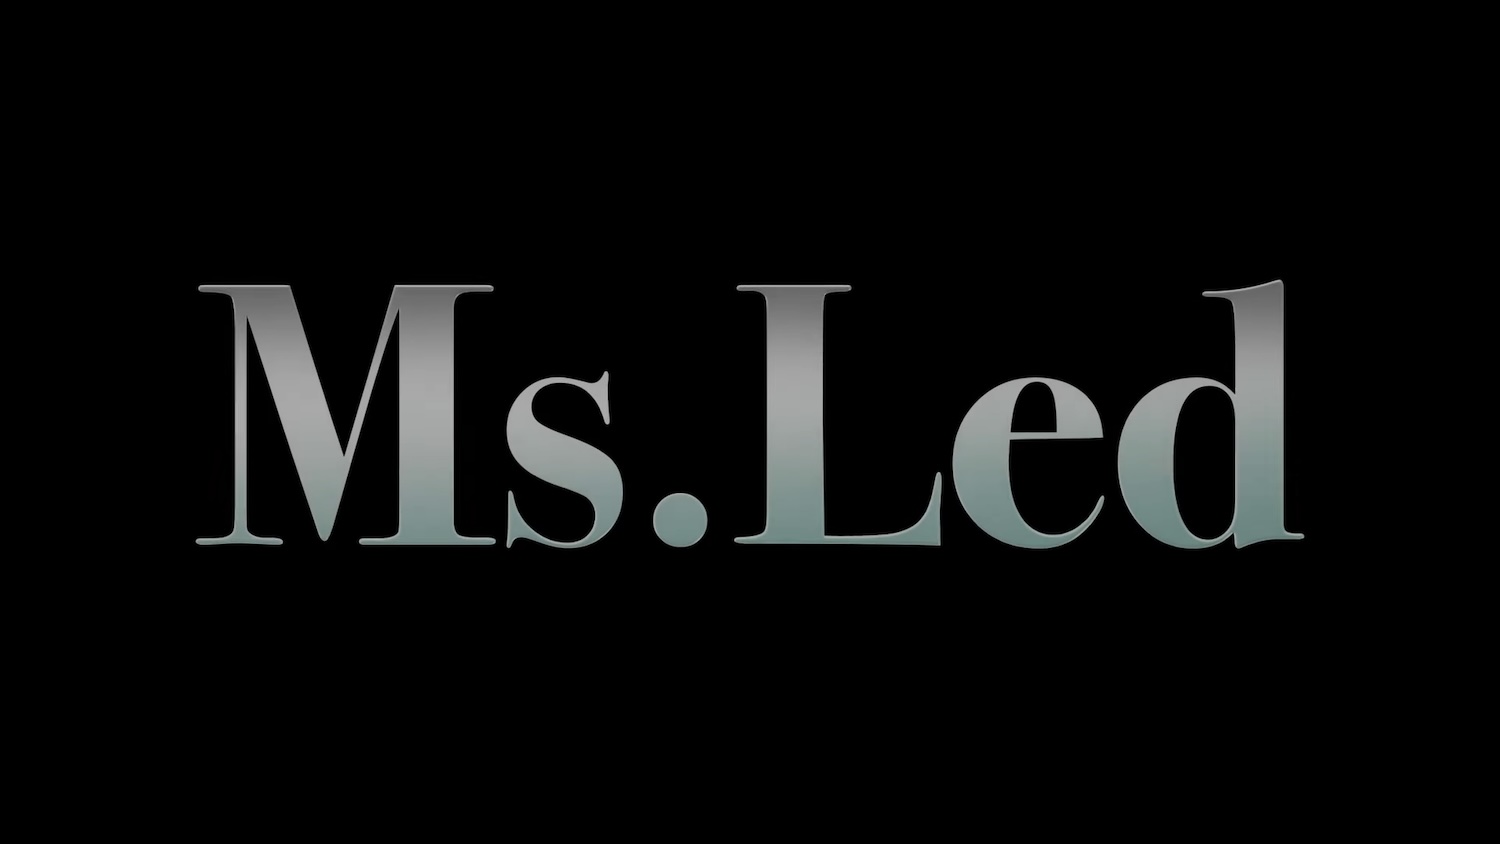 Ms.Led Documentary (Video)